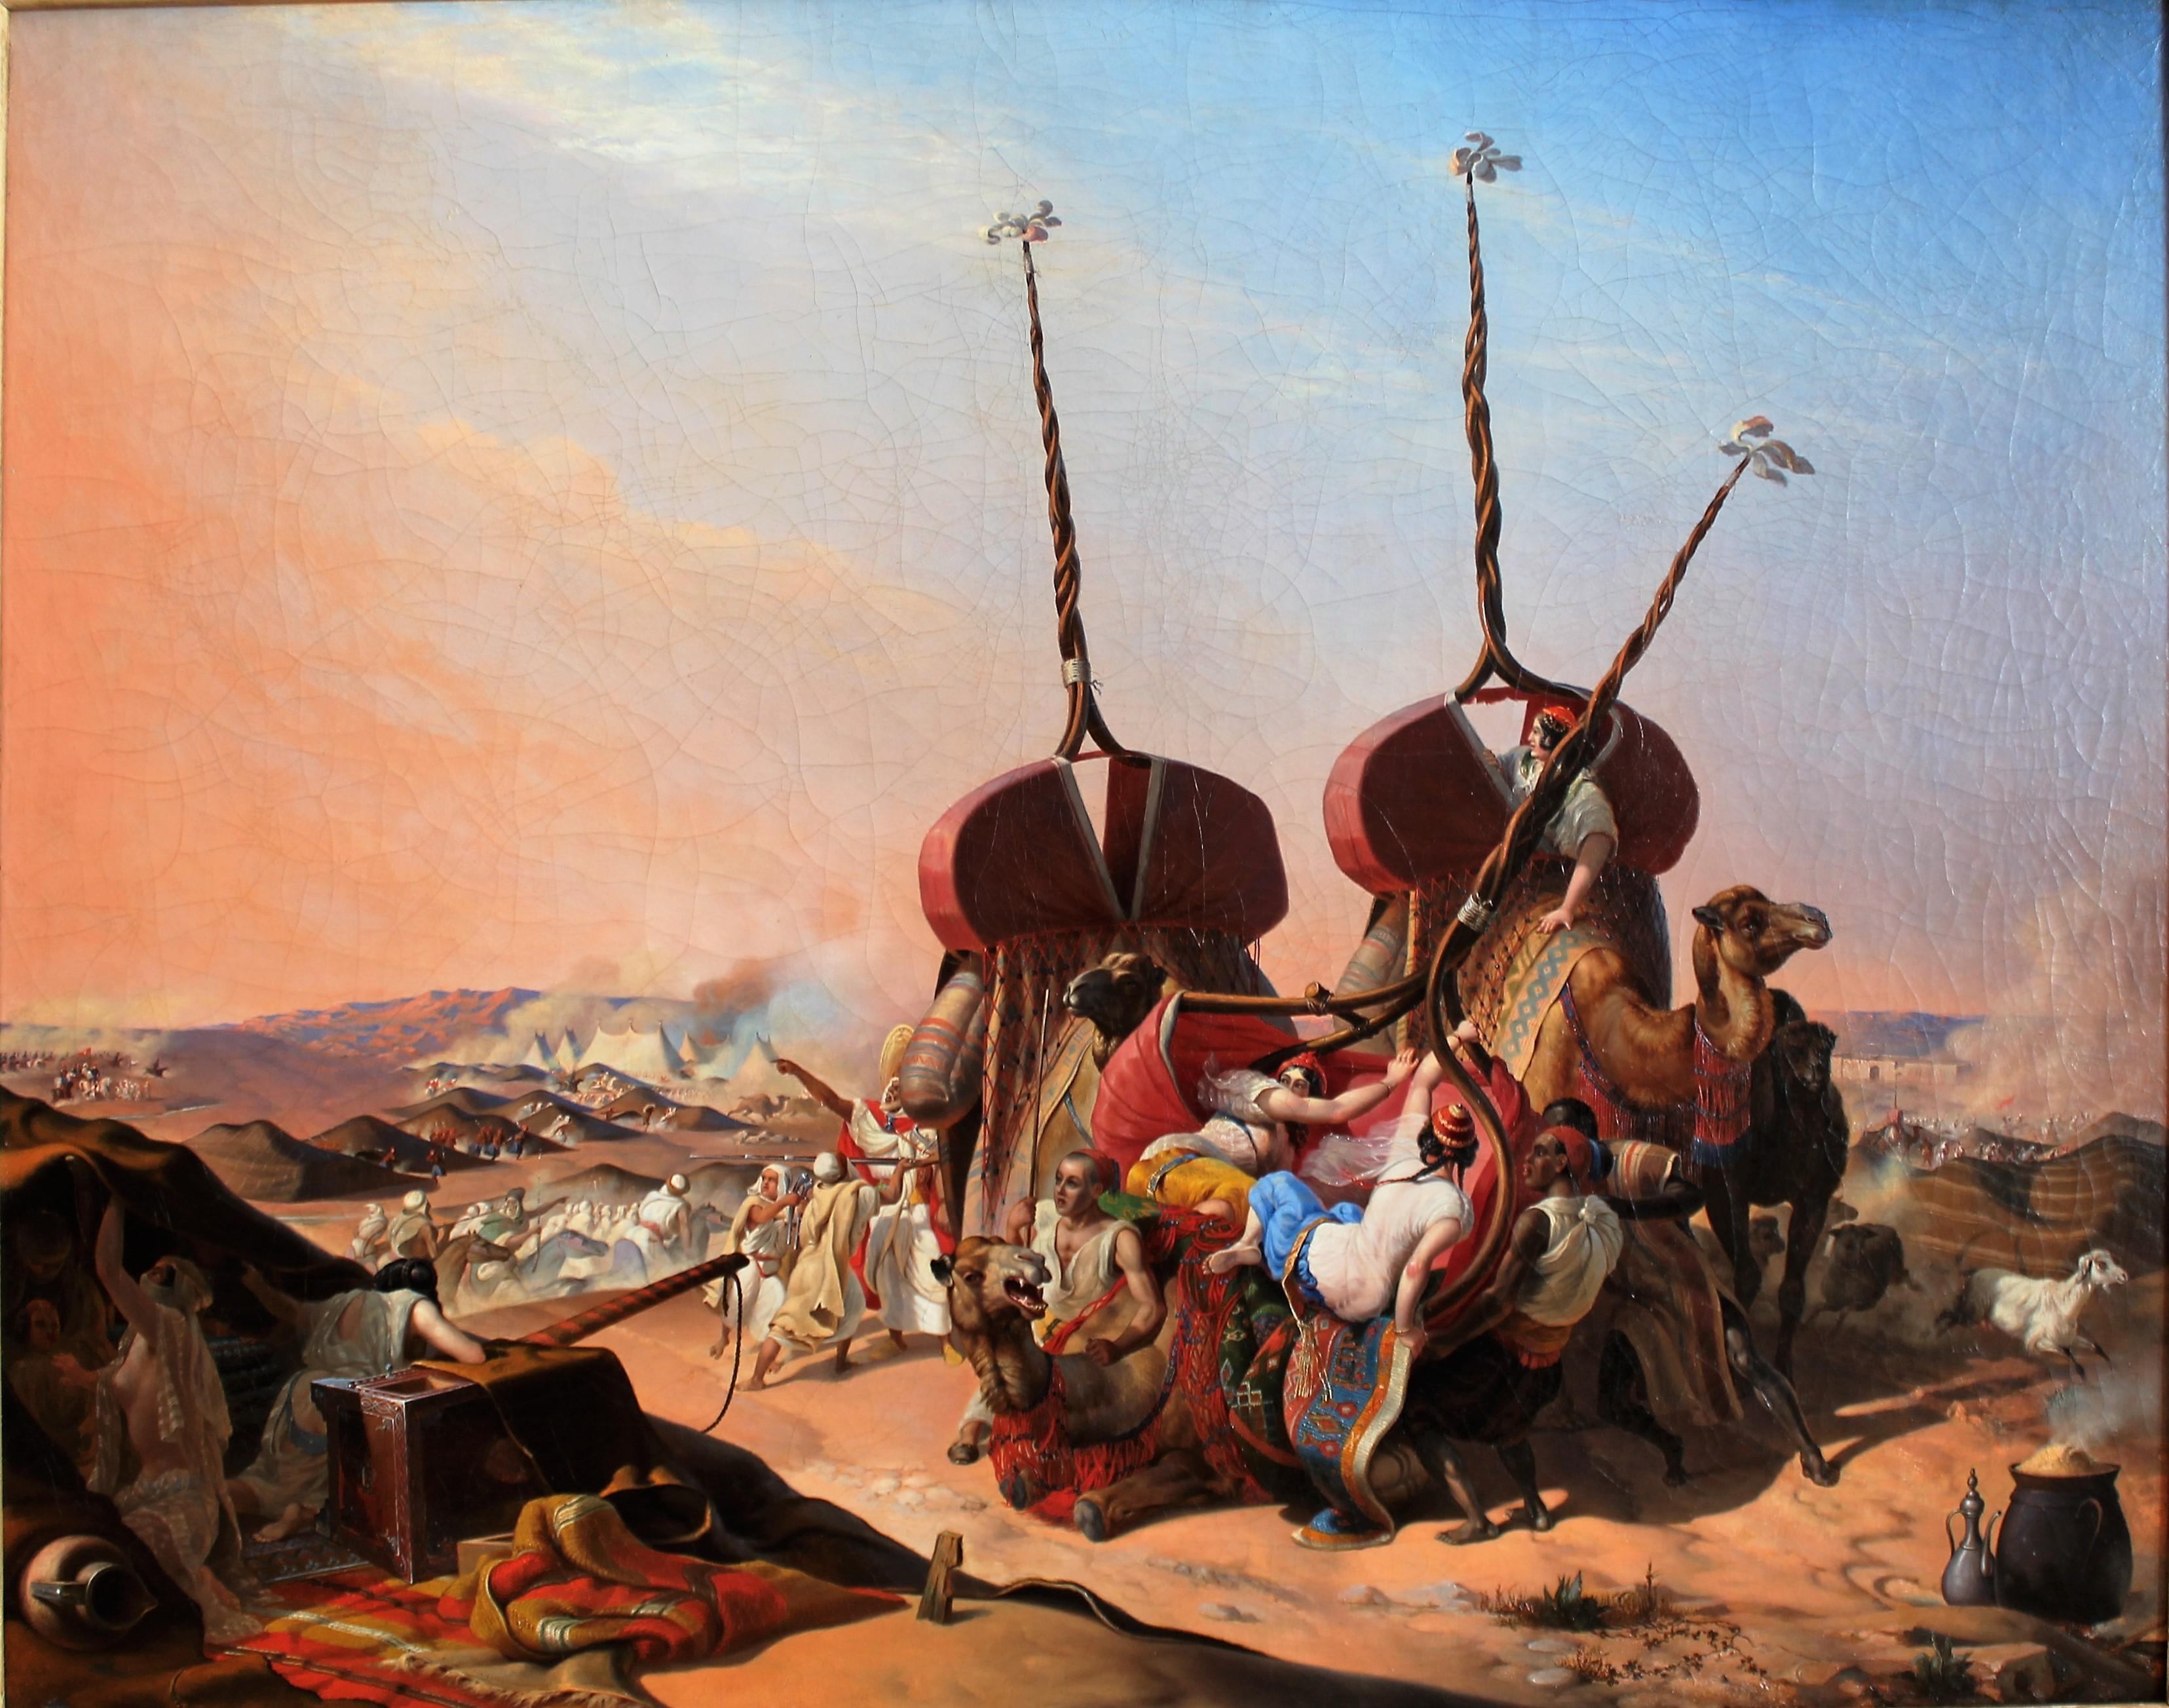 Circle of Emile Jean Horace Vernet (1789-1863)
The Capture of the Smalah of Abd el Kader
oil on canvas
48 x 55 1/2 in; 121 x 141 cms
(including magnificent contemporary carved frame)

Provenance
Private collection, United States

This important and